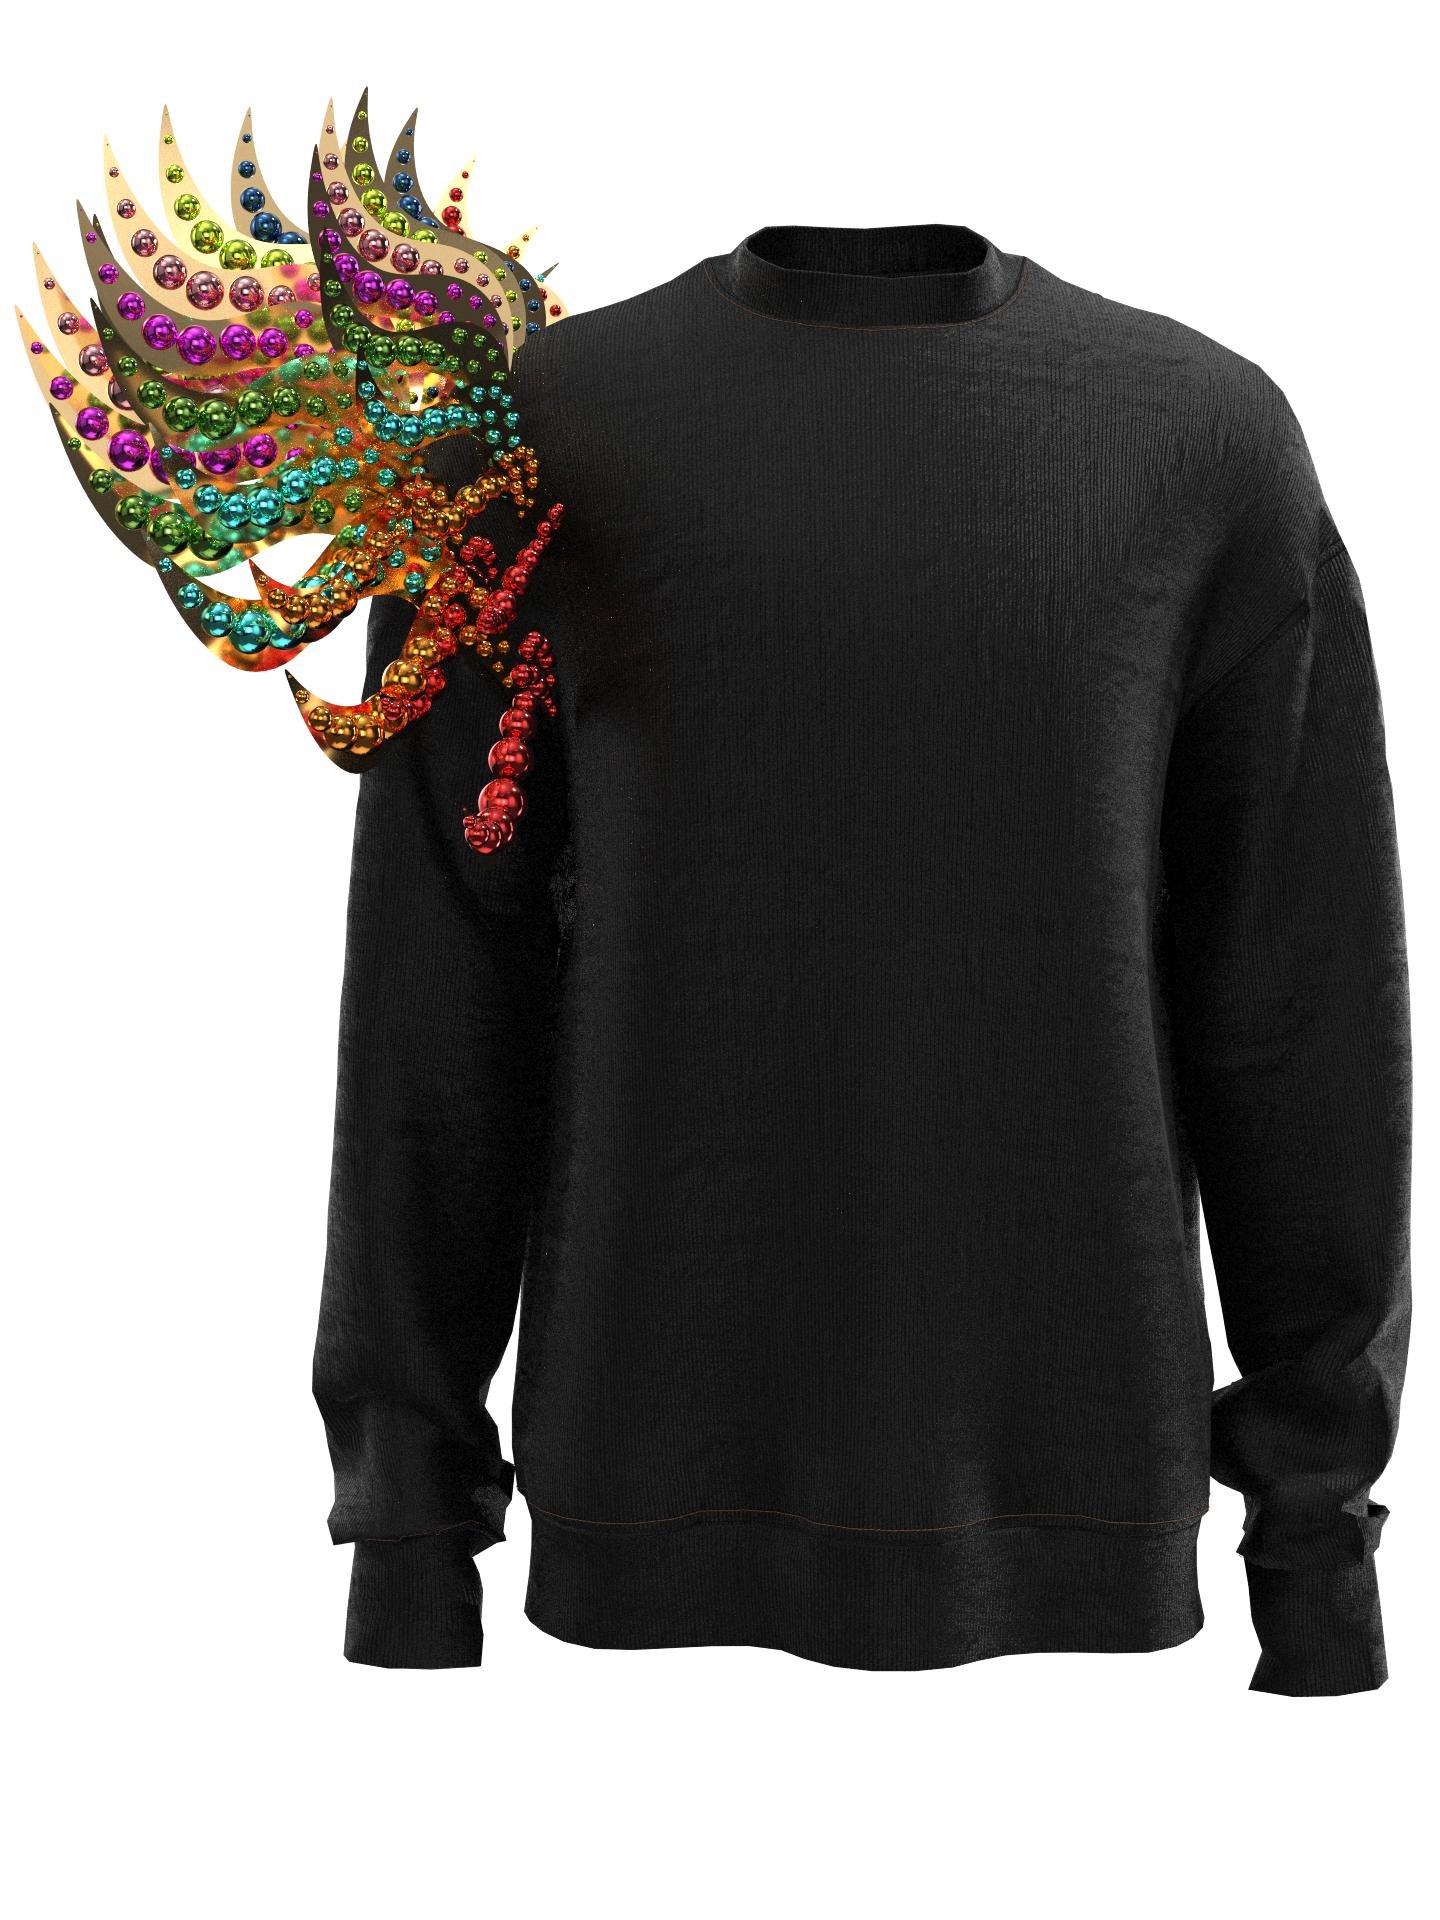 Sweatshirt decorated shoulder black by SDGS INSPIRED COLLECTION